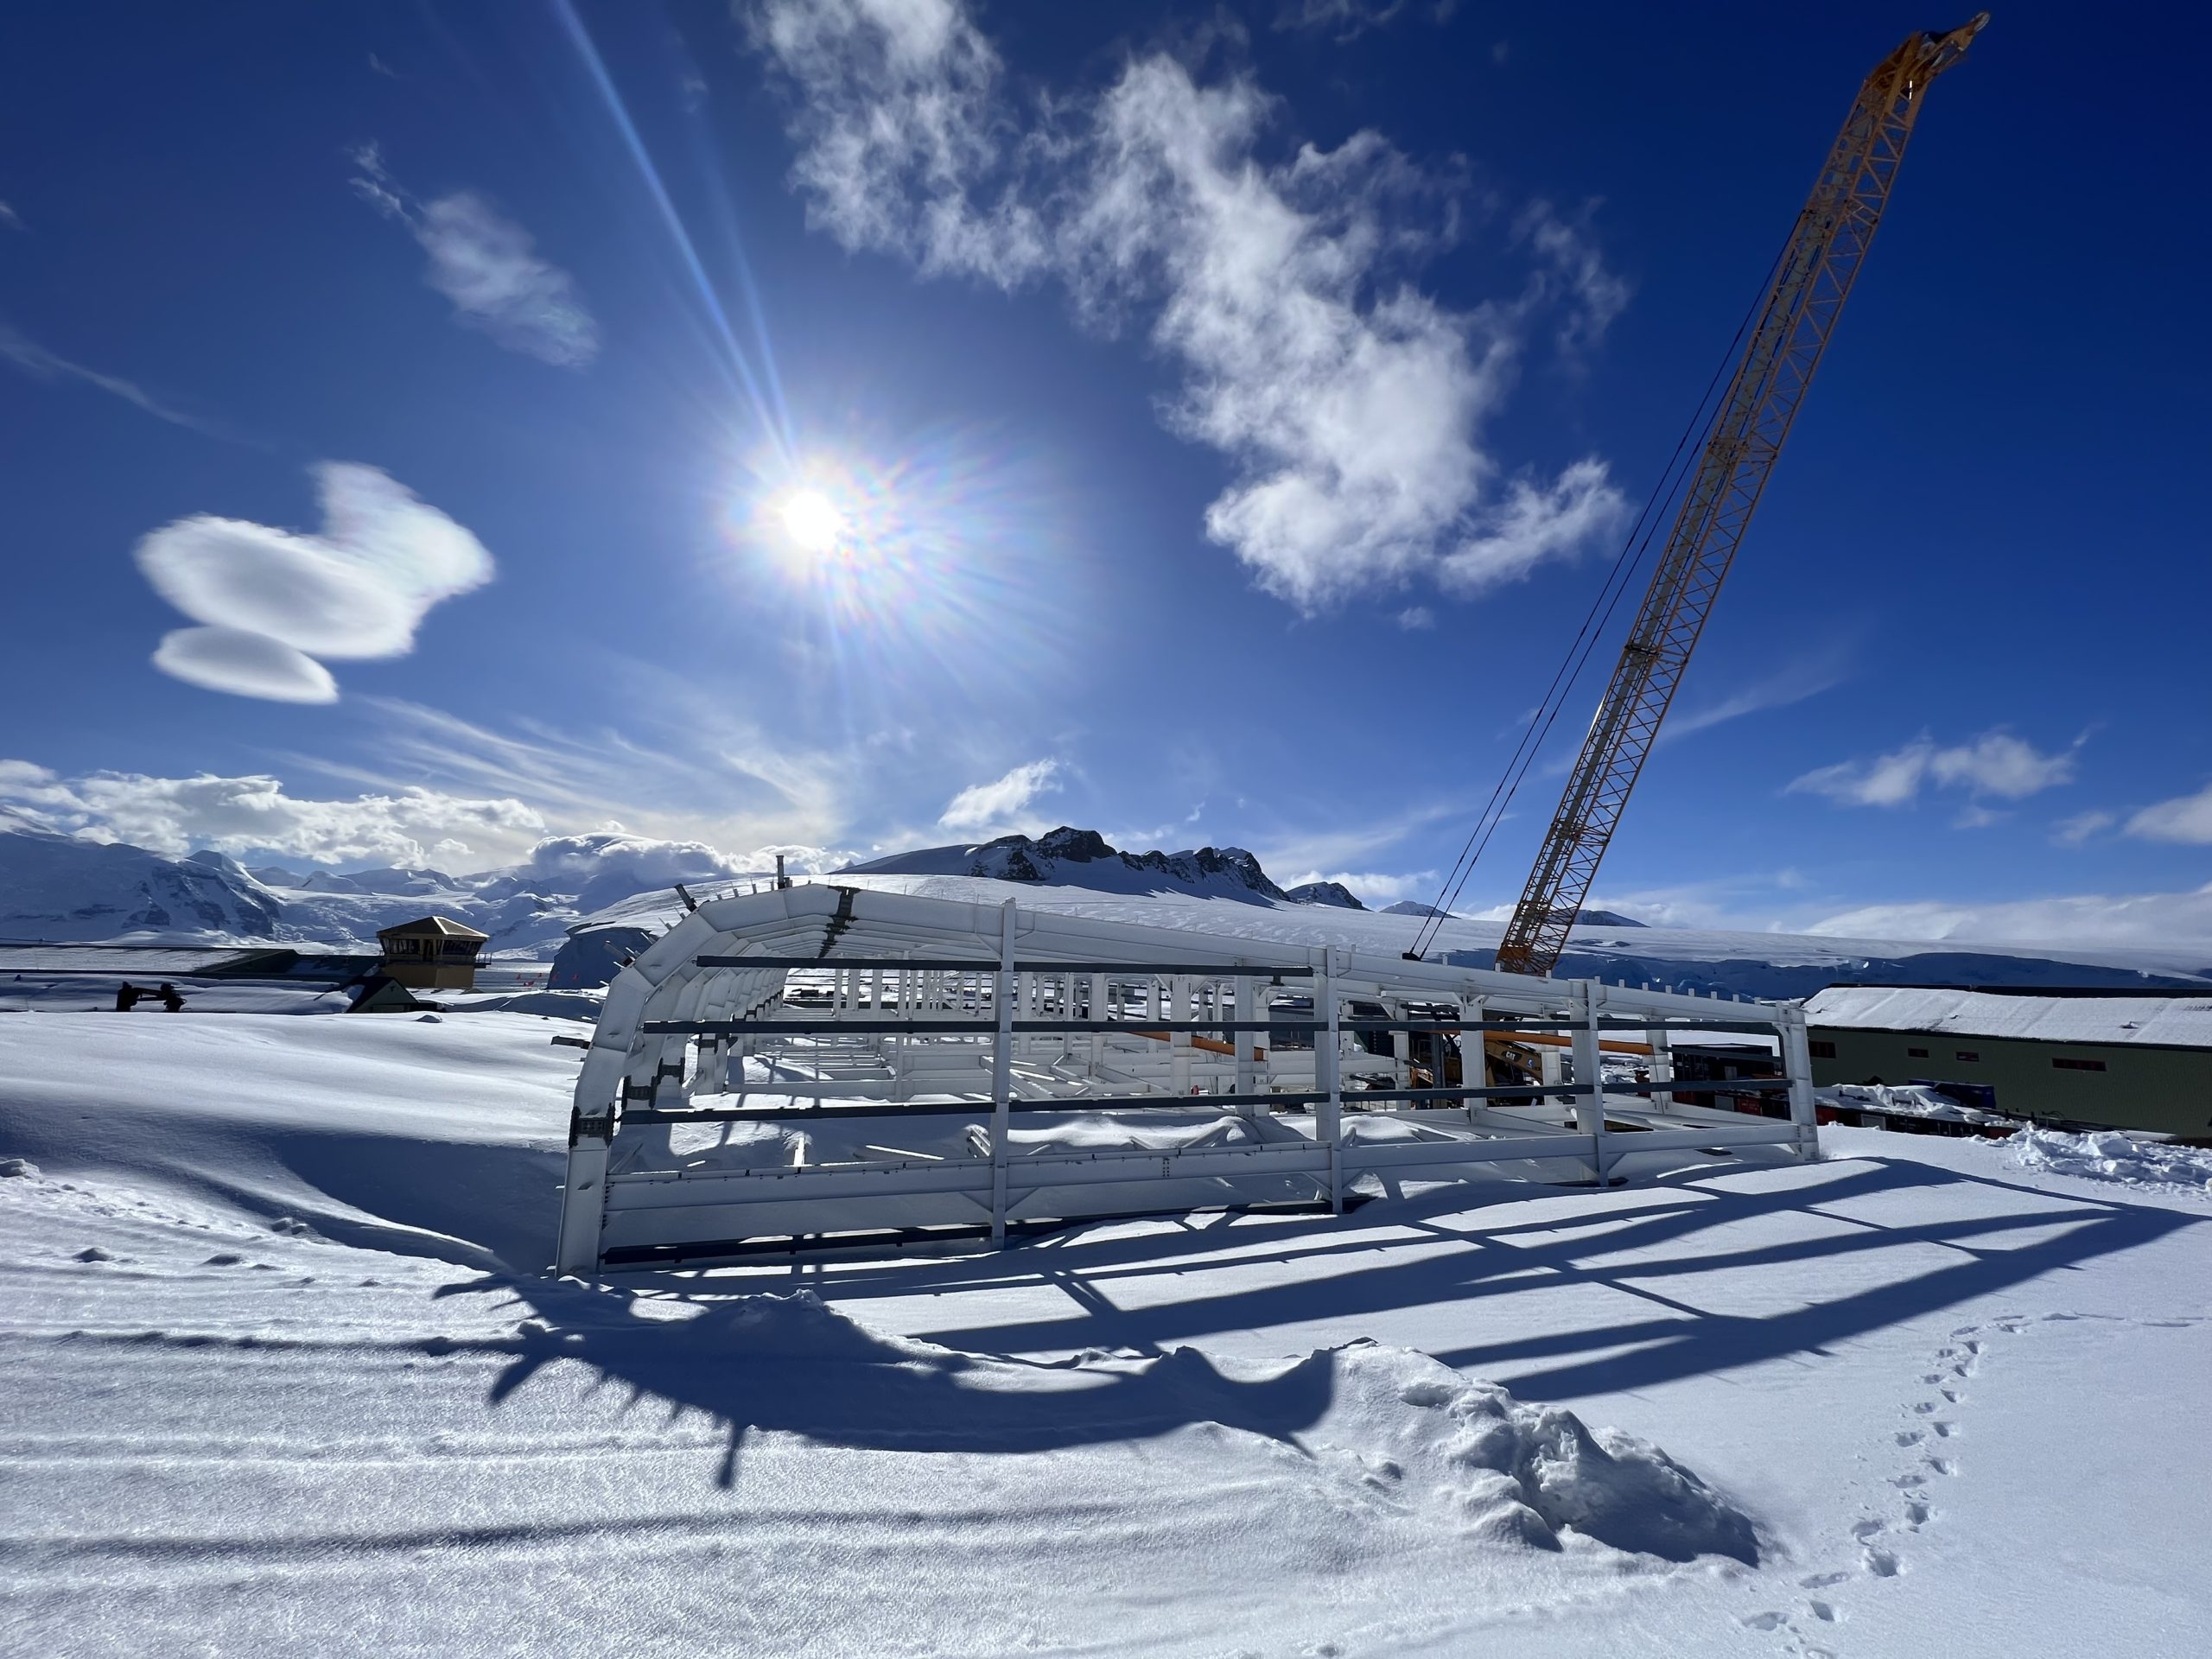 skeleton of a building being built in Antarctica with blue skies and snow in the foreground against a white steel frame with a red crane beside it